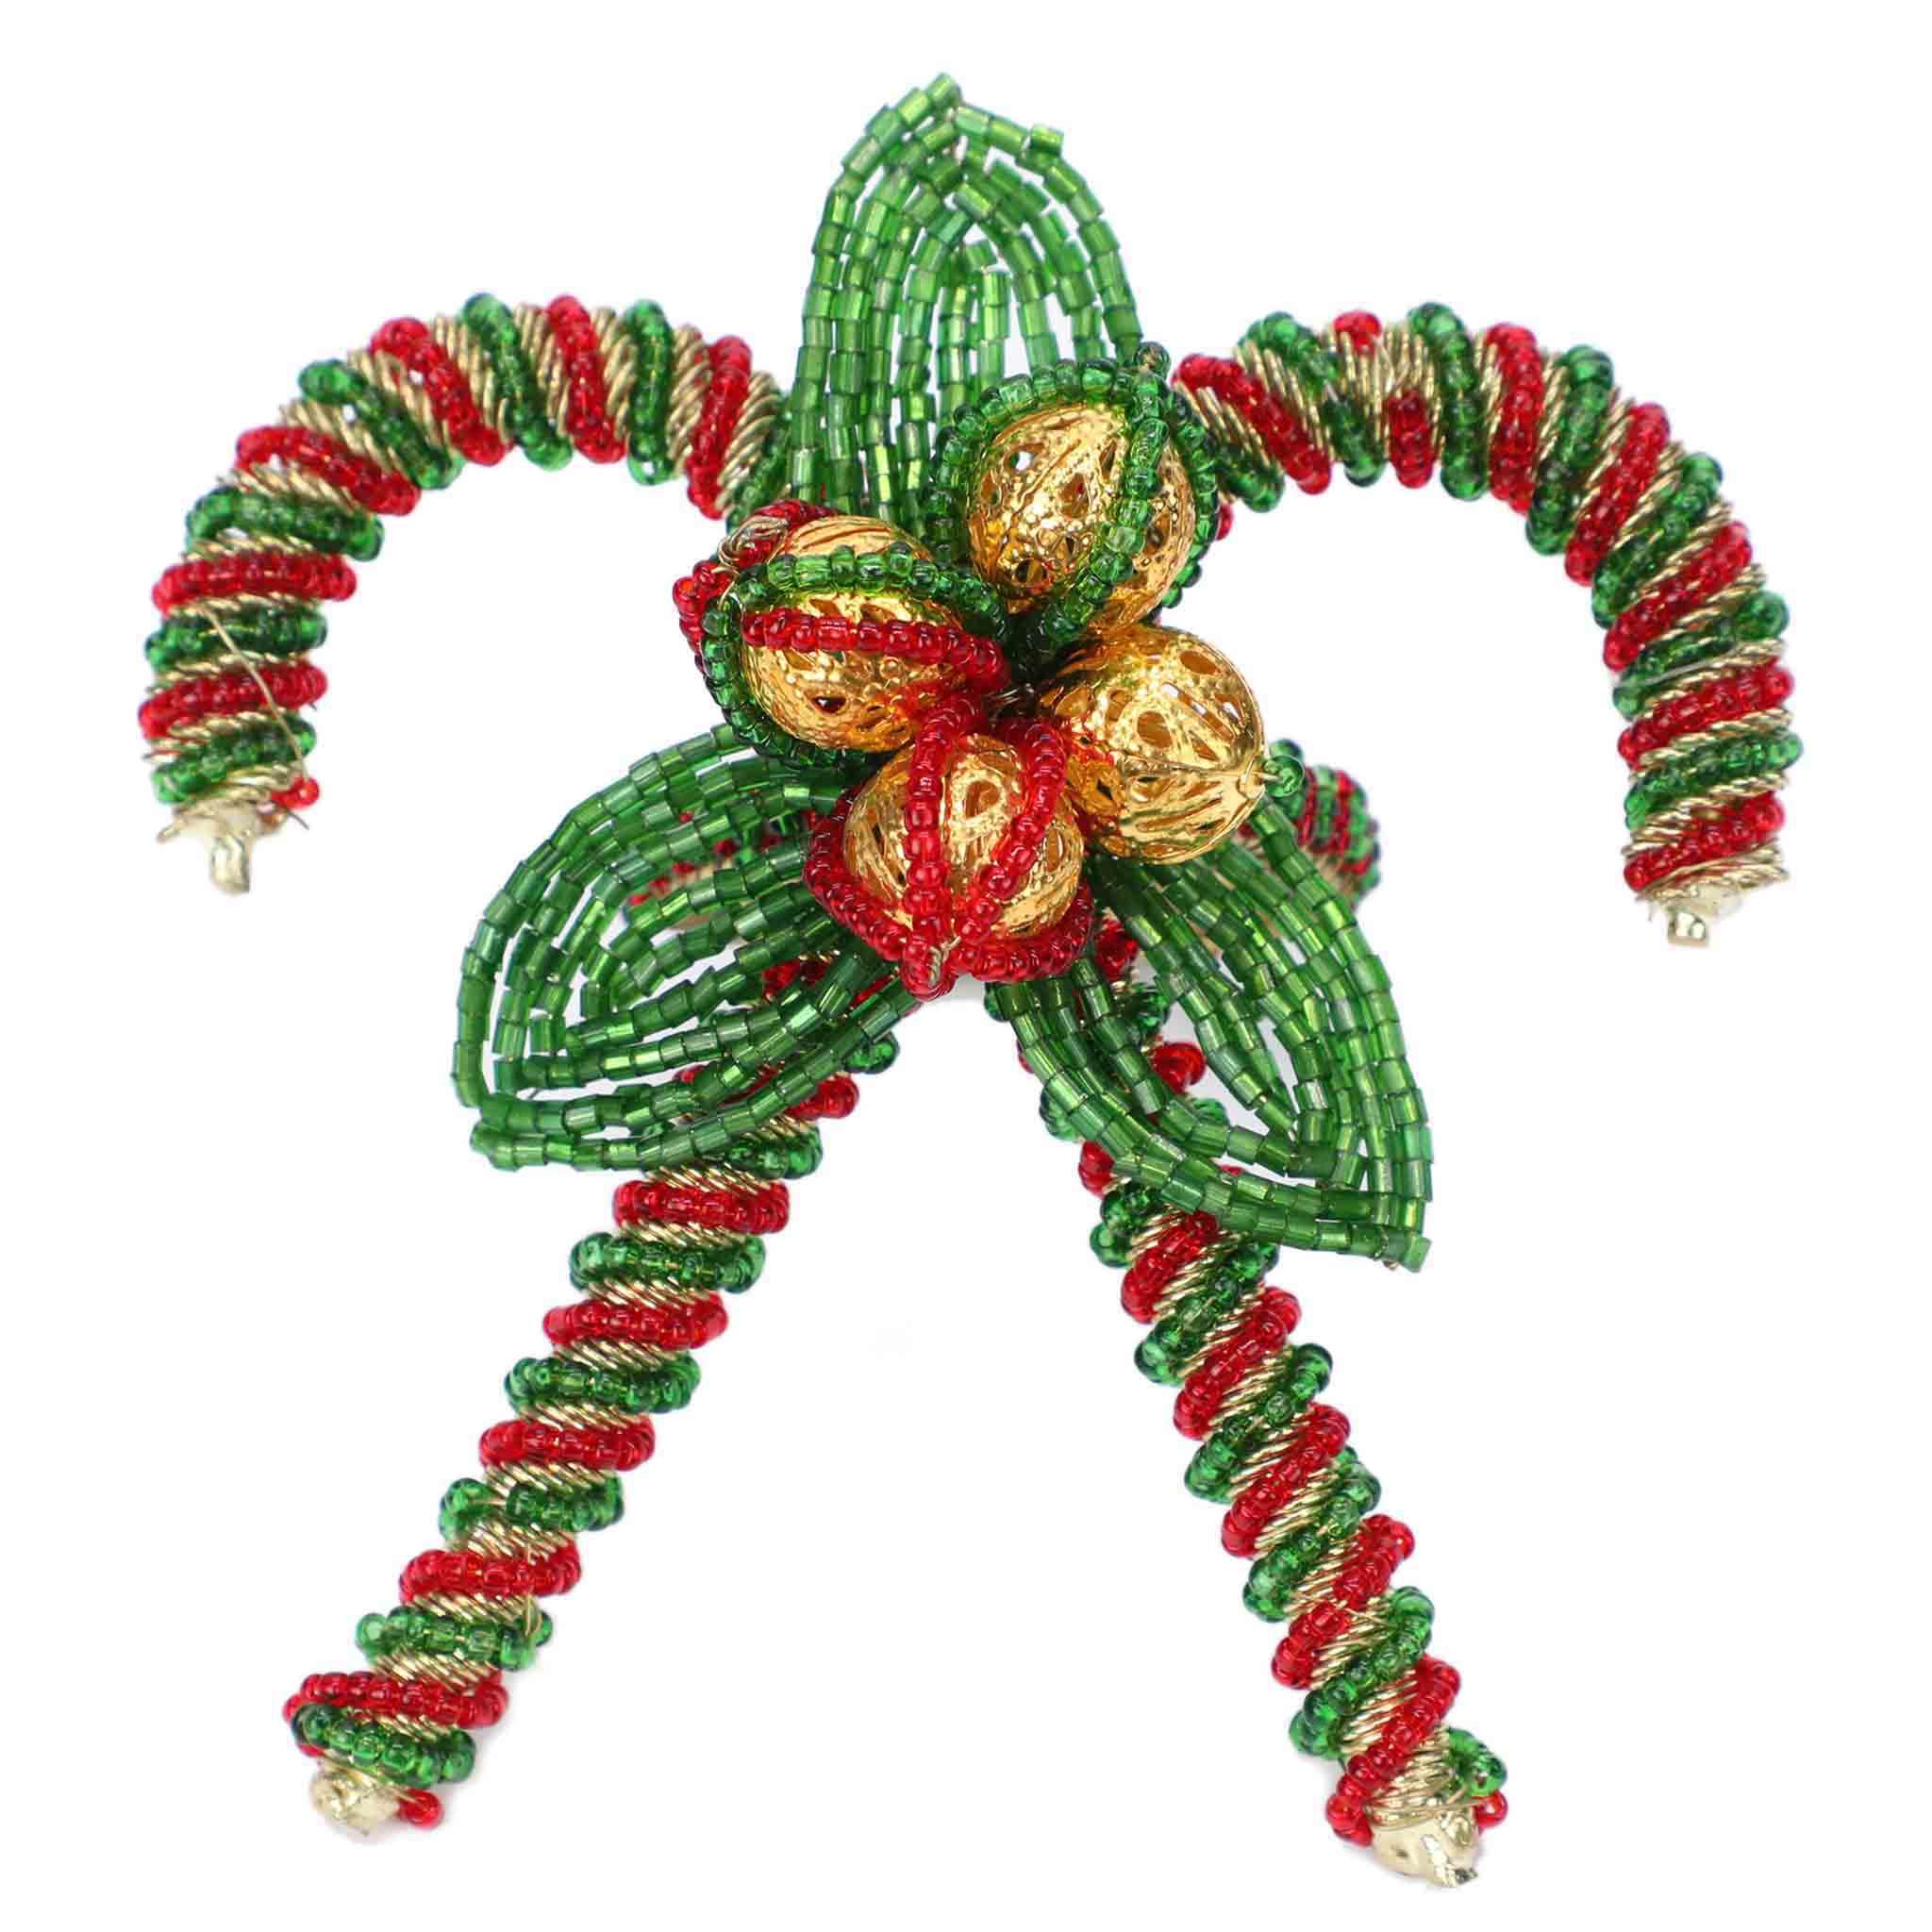 Poinsettia & Holly Bead Table Setting for 4 - Embroidered Holiday Placemats, Napkin Rings & Table Runner in Red & Green